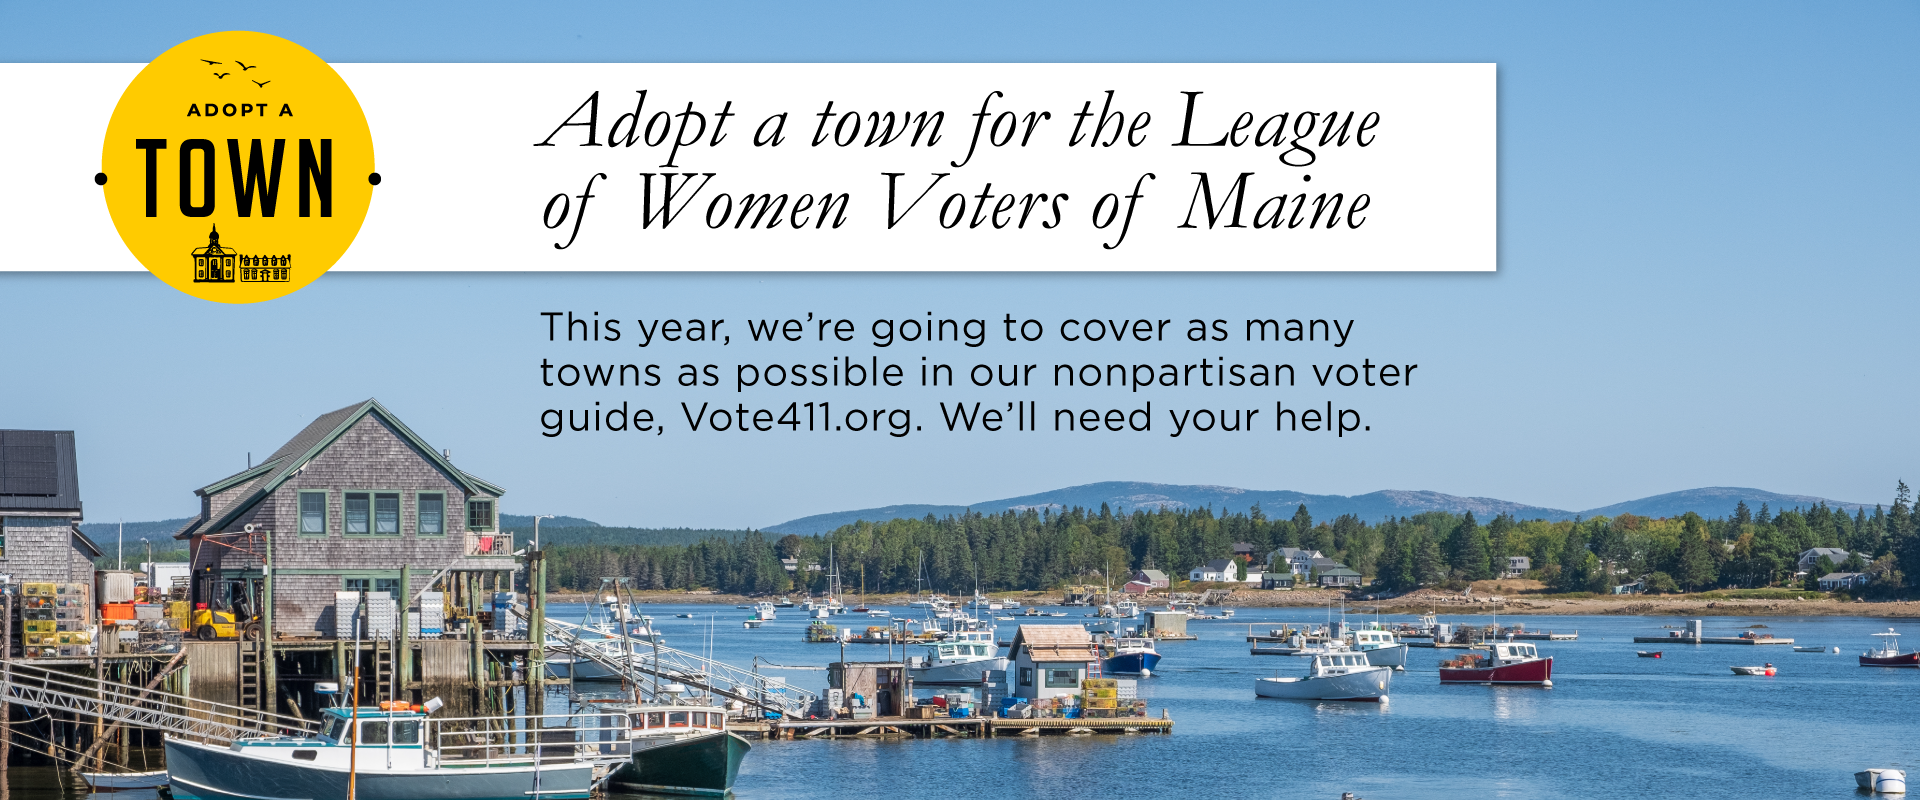 Adopt a town for the League of Women Voters of Maine! This year, we’re going to cover as many towns as possible in our nonpartisan voter guide, Vote411.org. We’ll need your help.